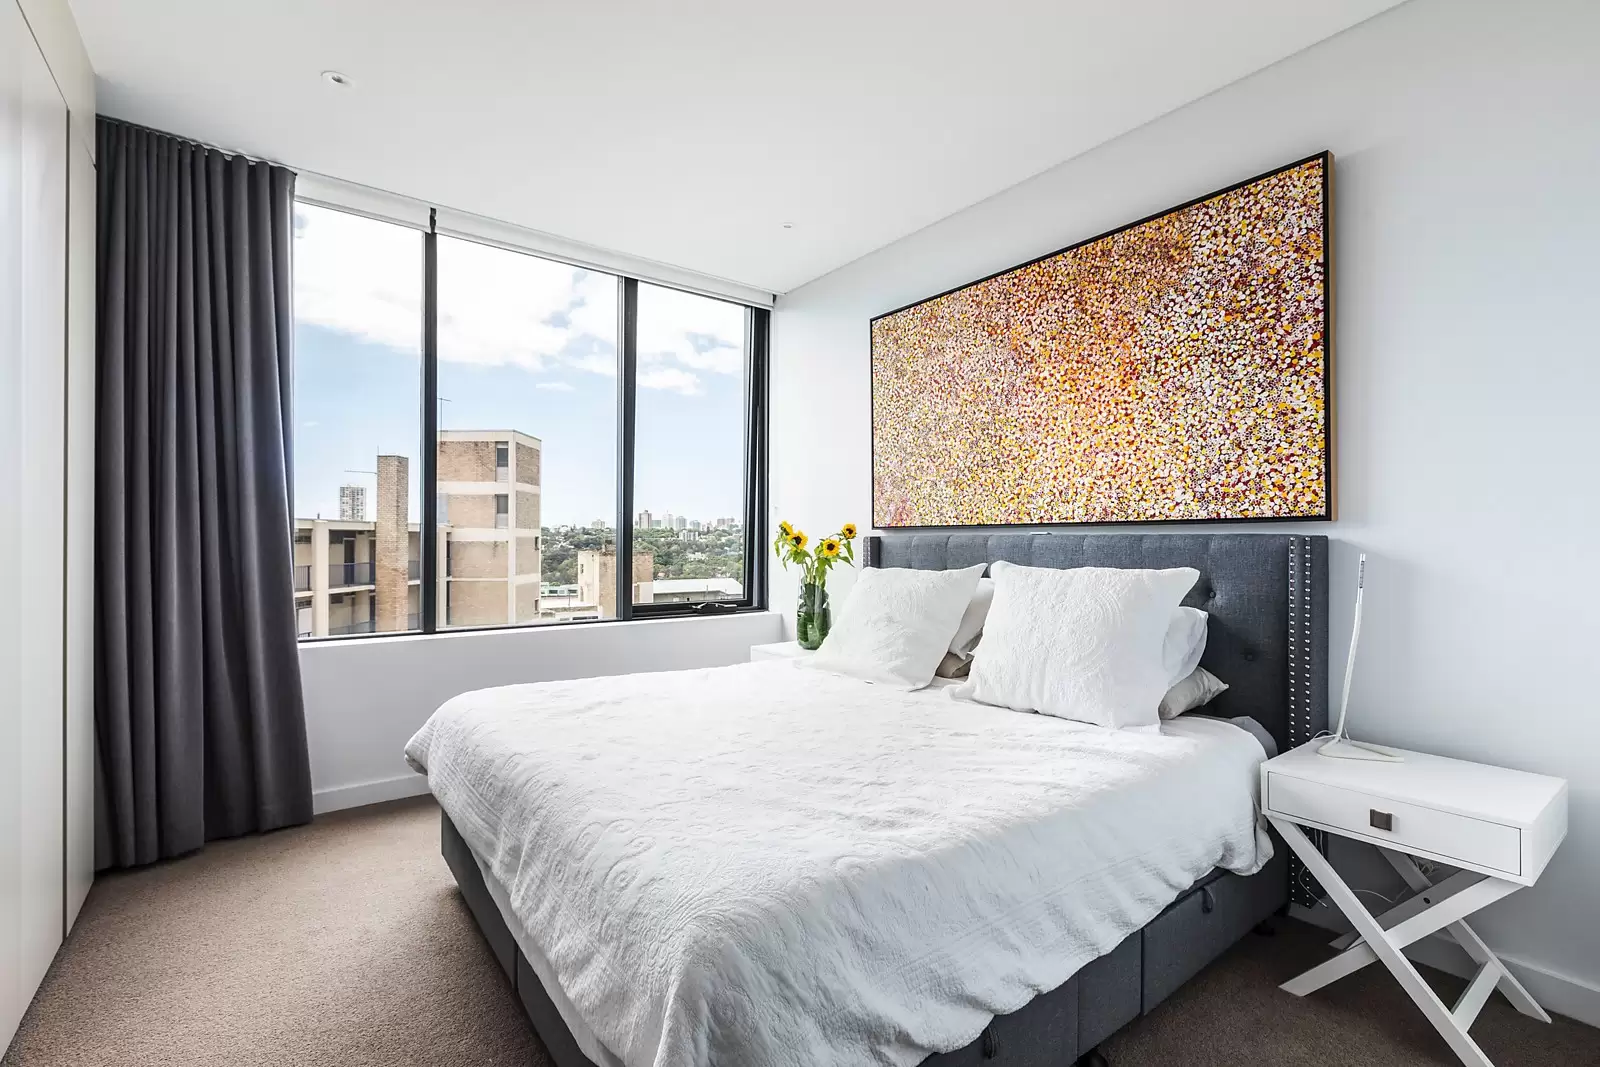 Photo #12: 702/37 Bayswater Road, Potts Point - Sold by Sydney Sotheby's International Realty